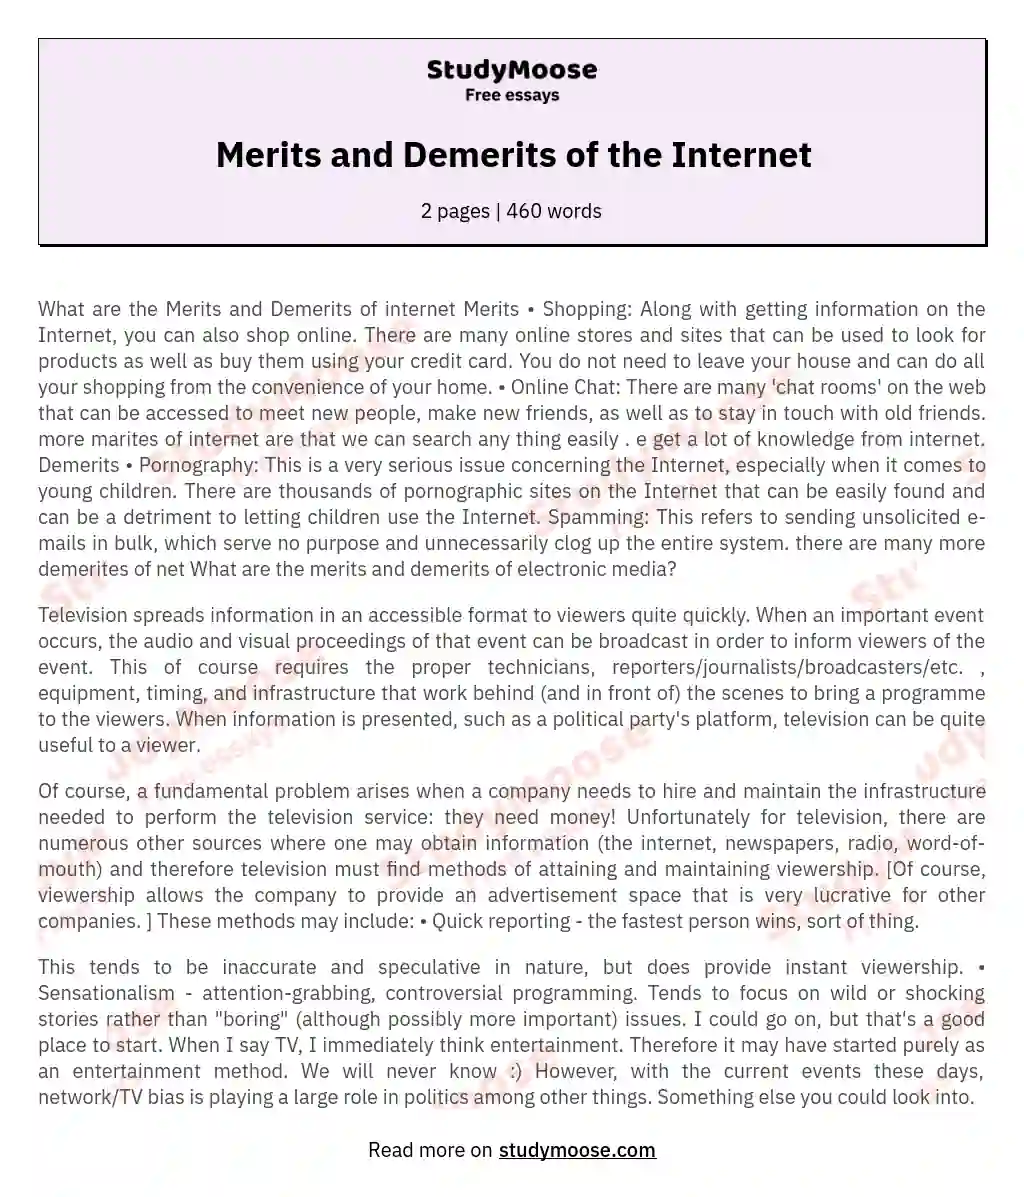 Merits and Demerits of the Internet